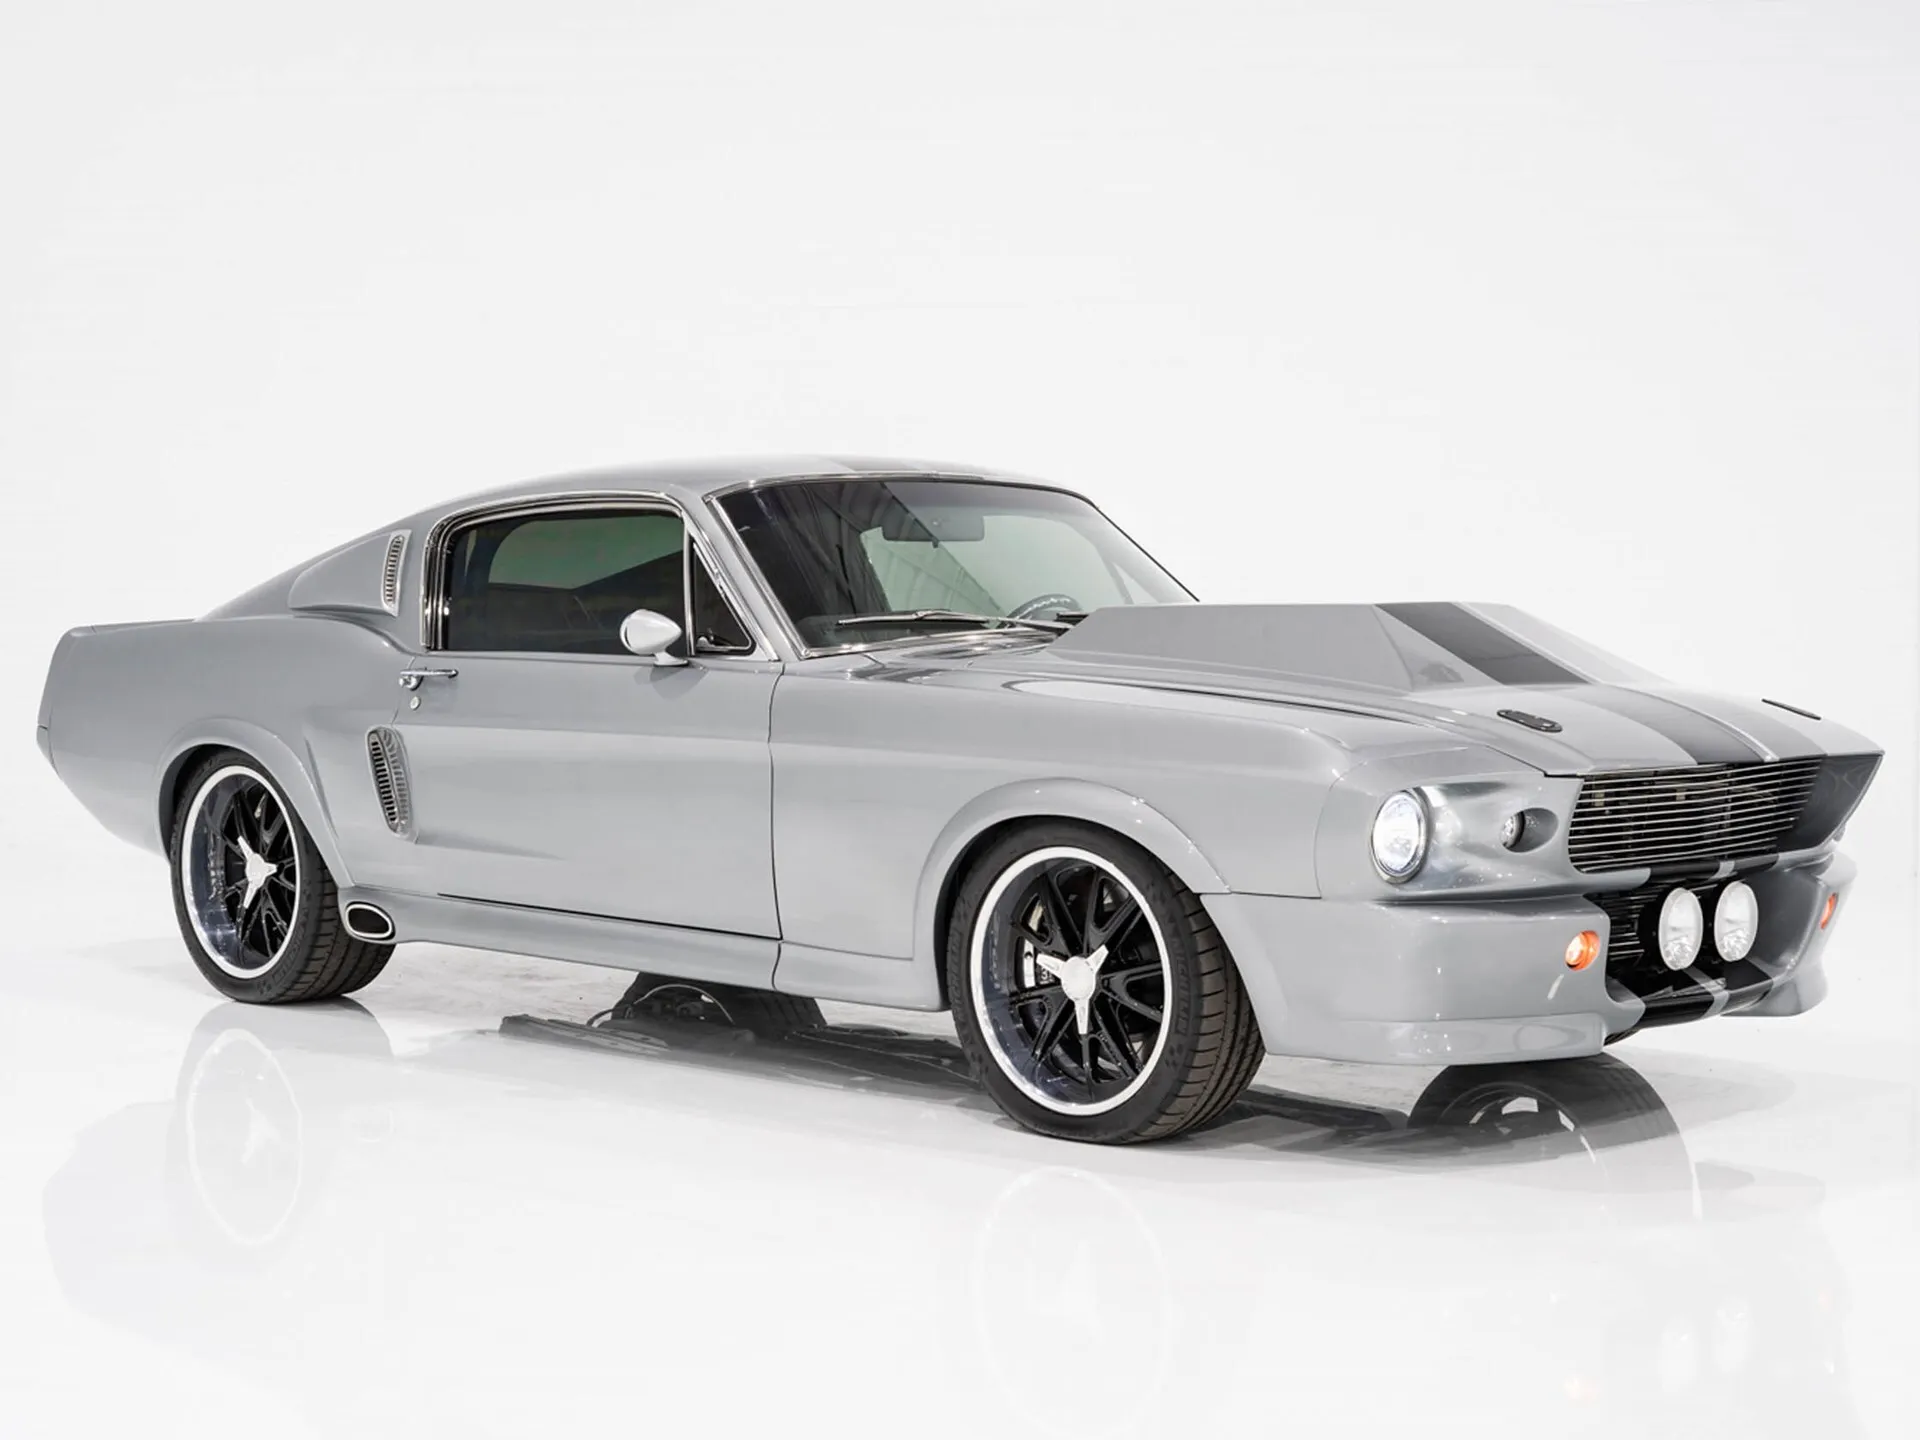 Mustang Of The Day: 1967 Ford Shelby GT500 Custom